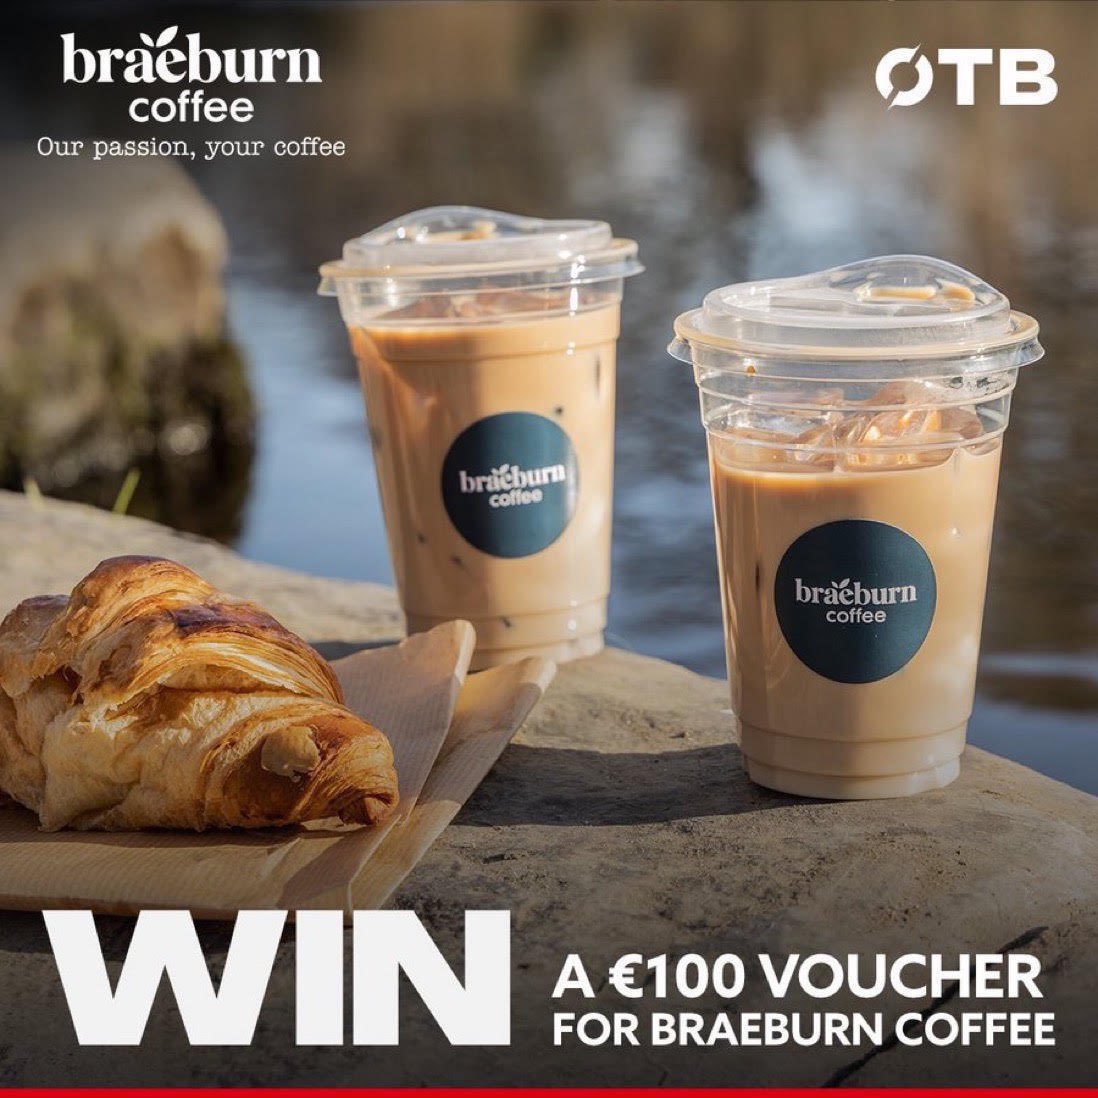 #OTB + #braeburncoffee ☕ Surely, there's no better way to start your day! Every week, we're giving one lucky viewer a €100 voucher to splash on some Braeburn Coffee goodness at a @goapplegreen near you! Just like & retweet this post, and you'll be in the draw!